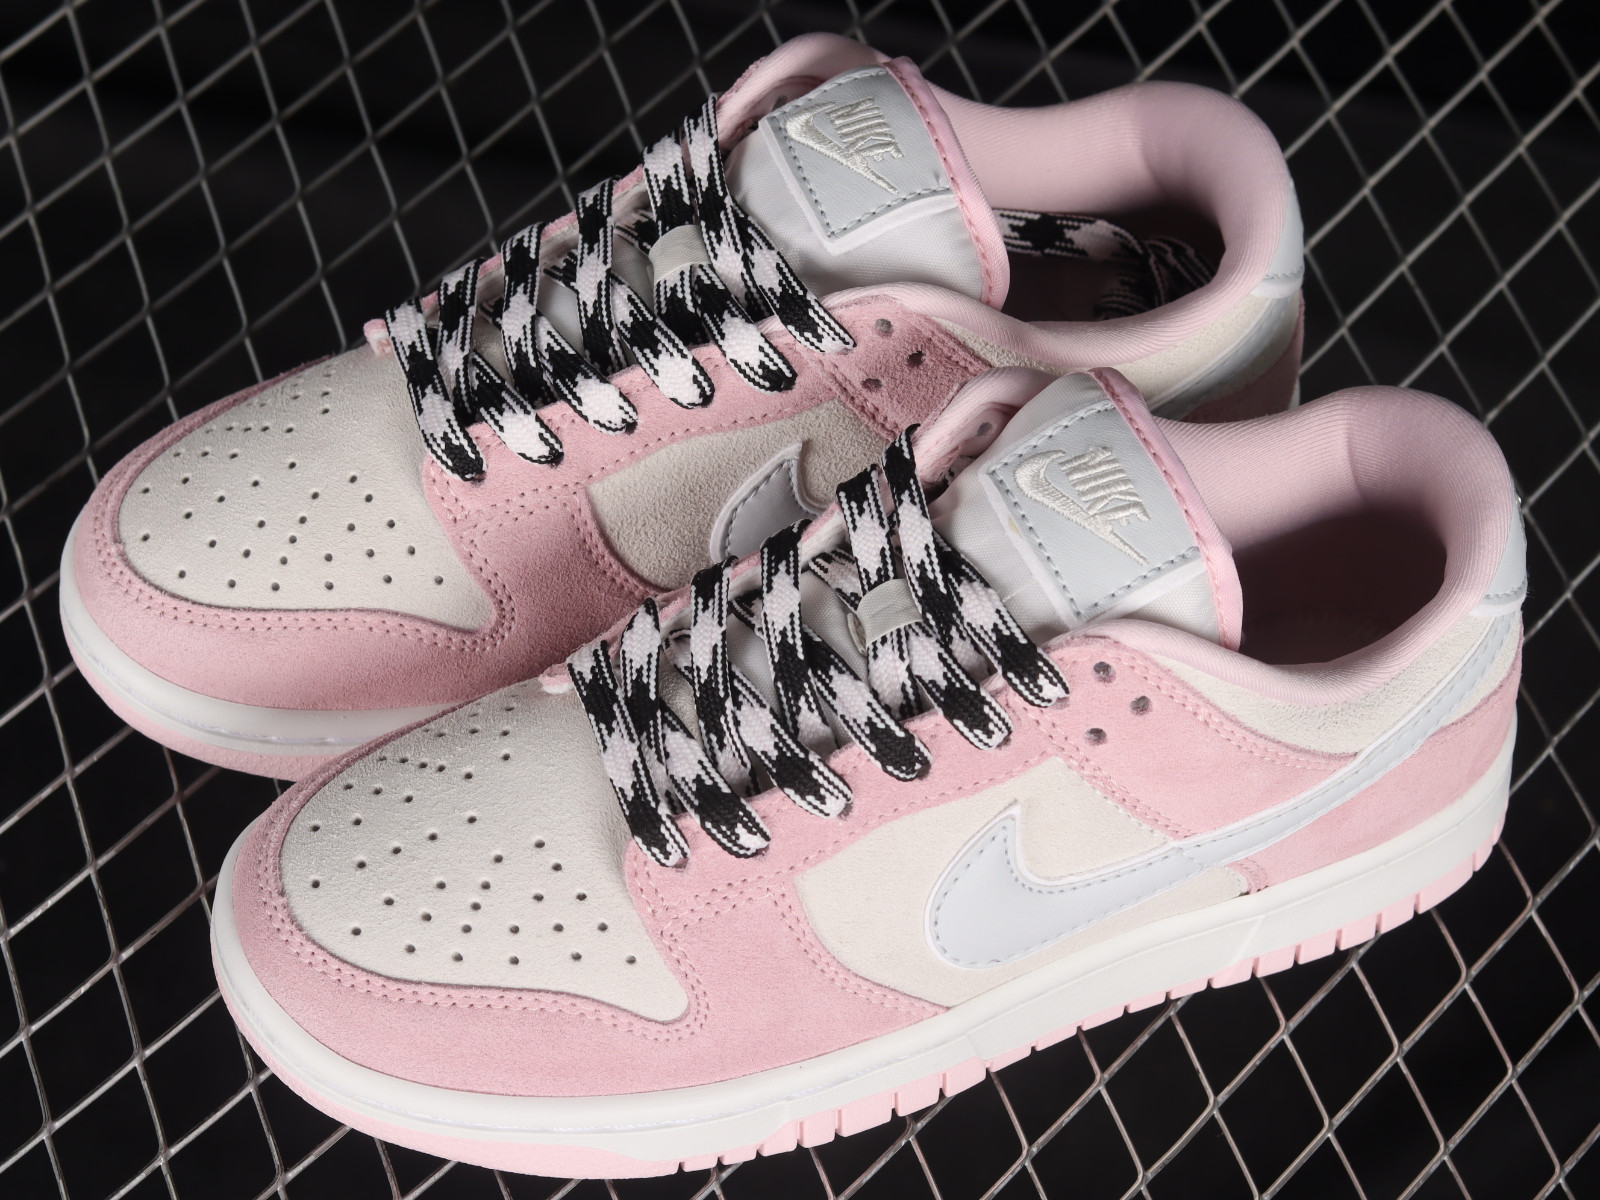 600 - MultiscaleconsultingShops - Nike SB Dunk selling Low LX Pink